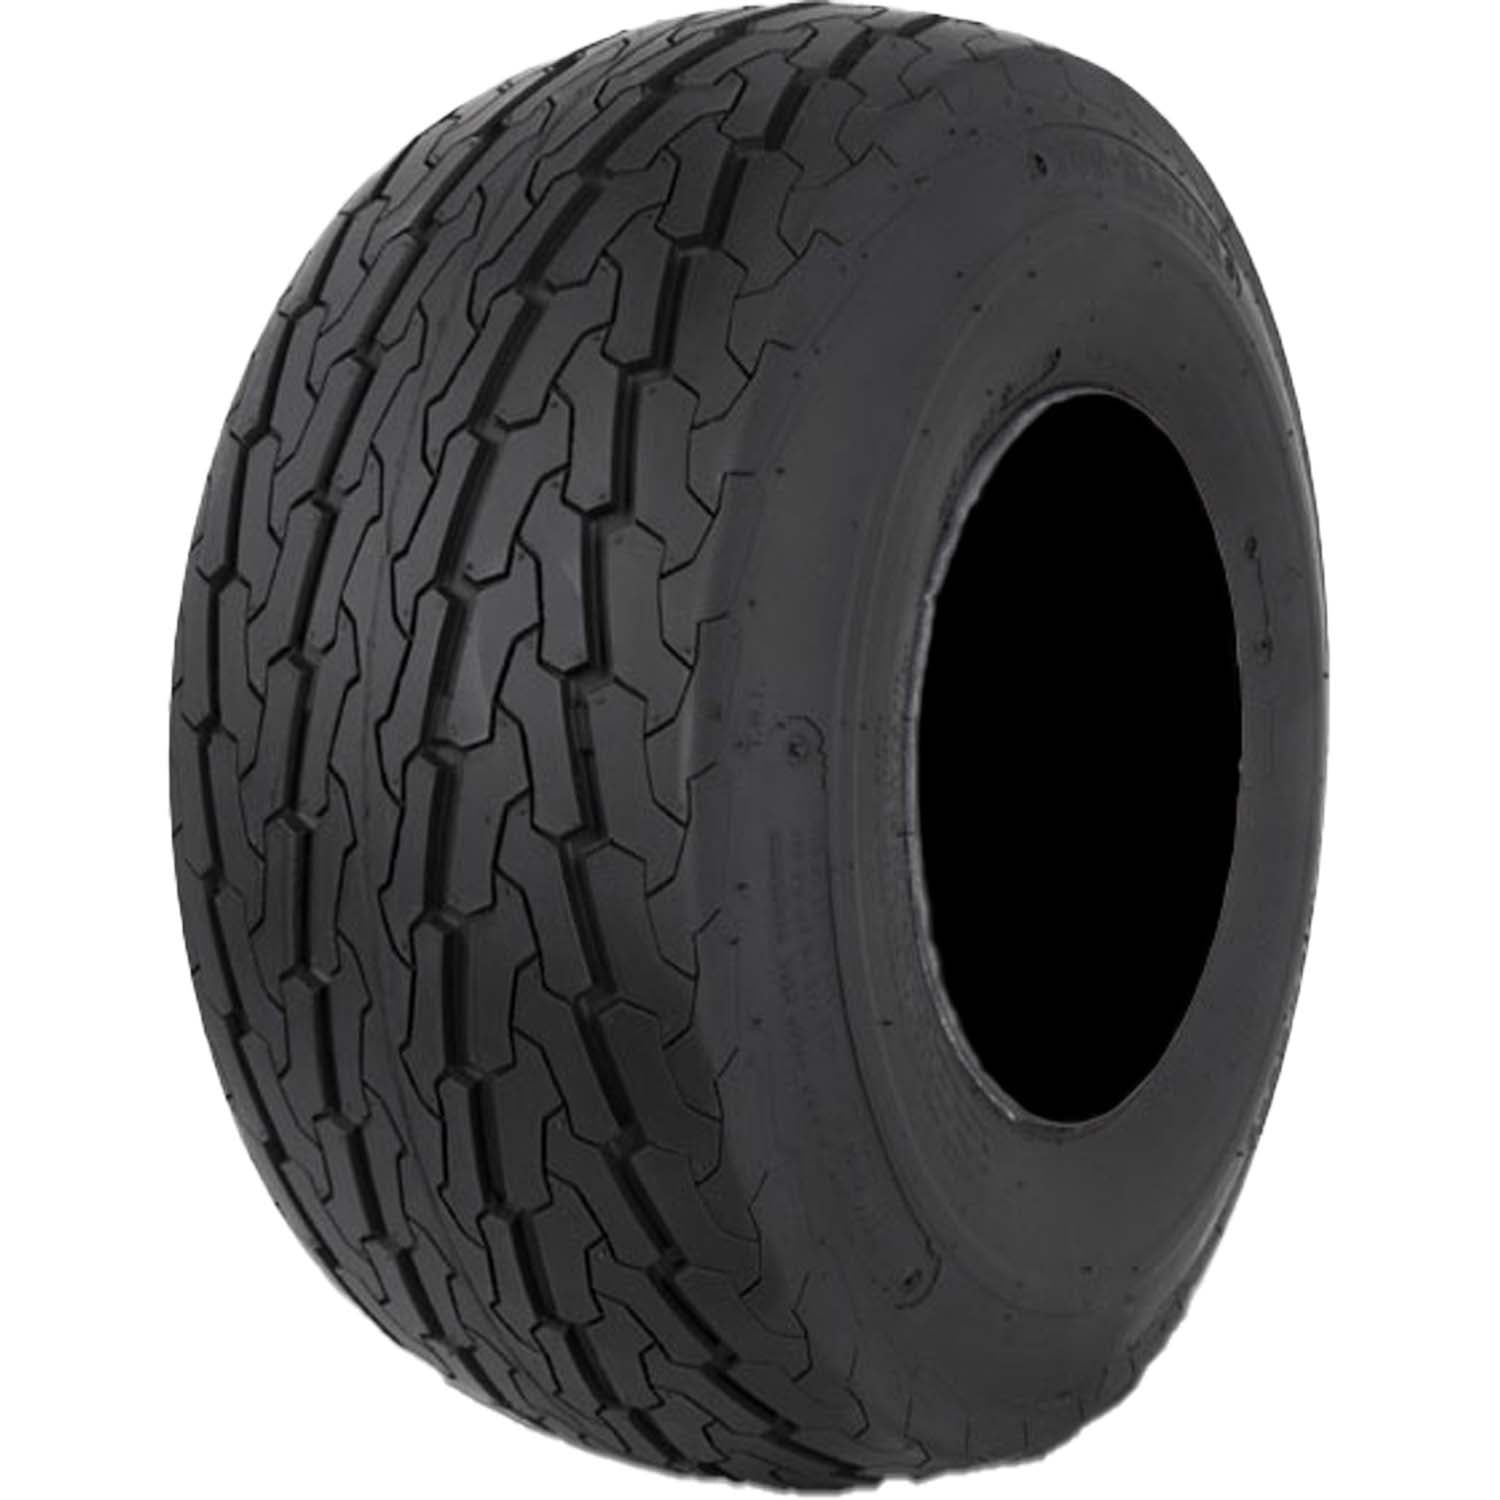 Greenball Towmaster HT332 Trailer Tire LRF 12ply 22.5x8.00-12